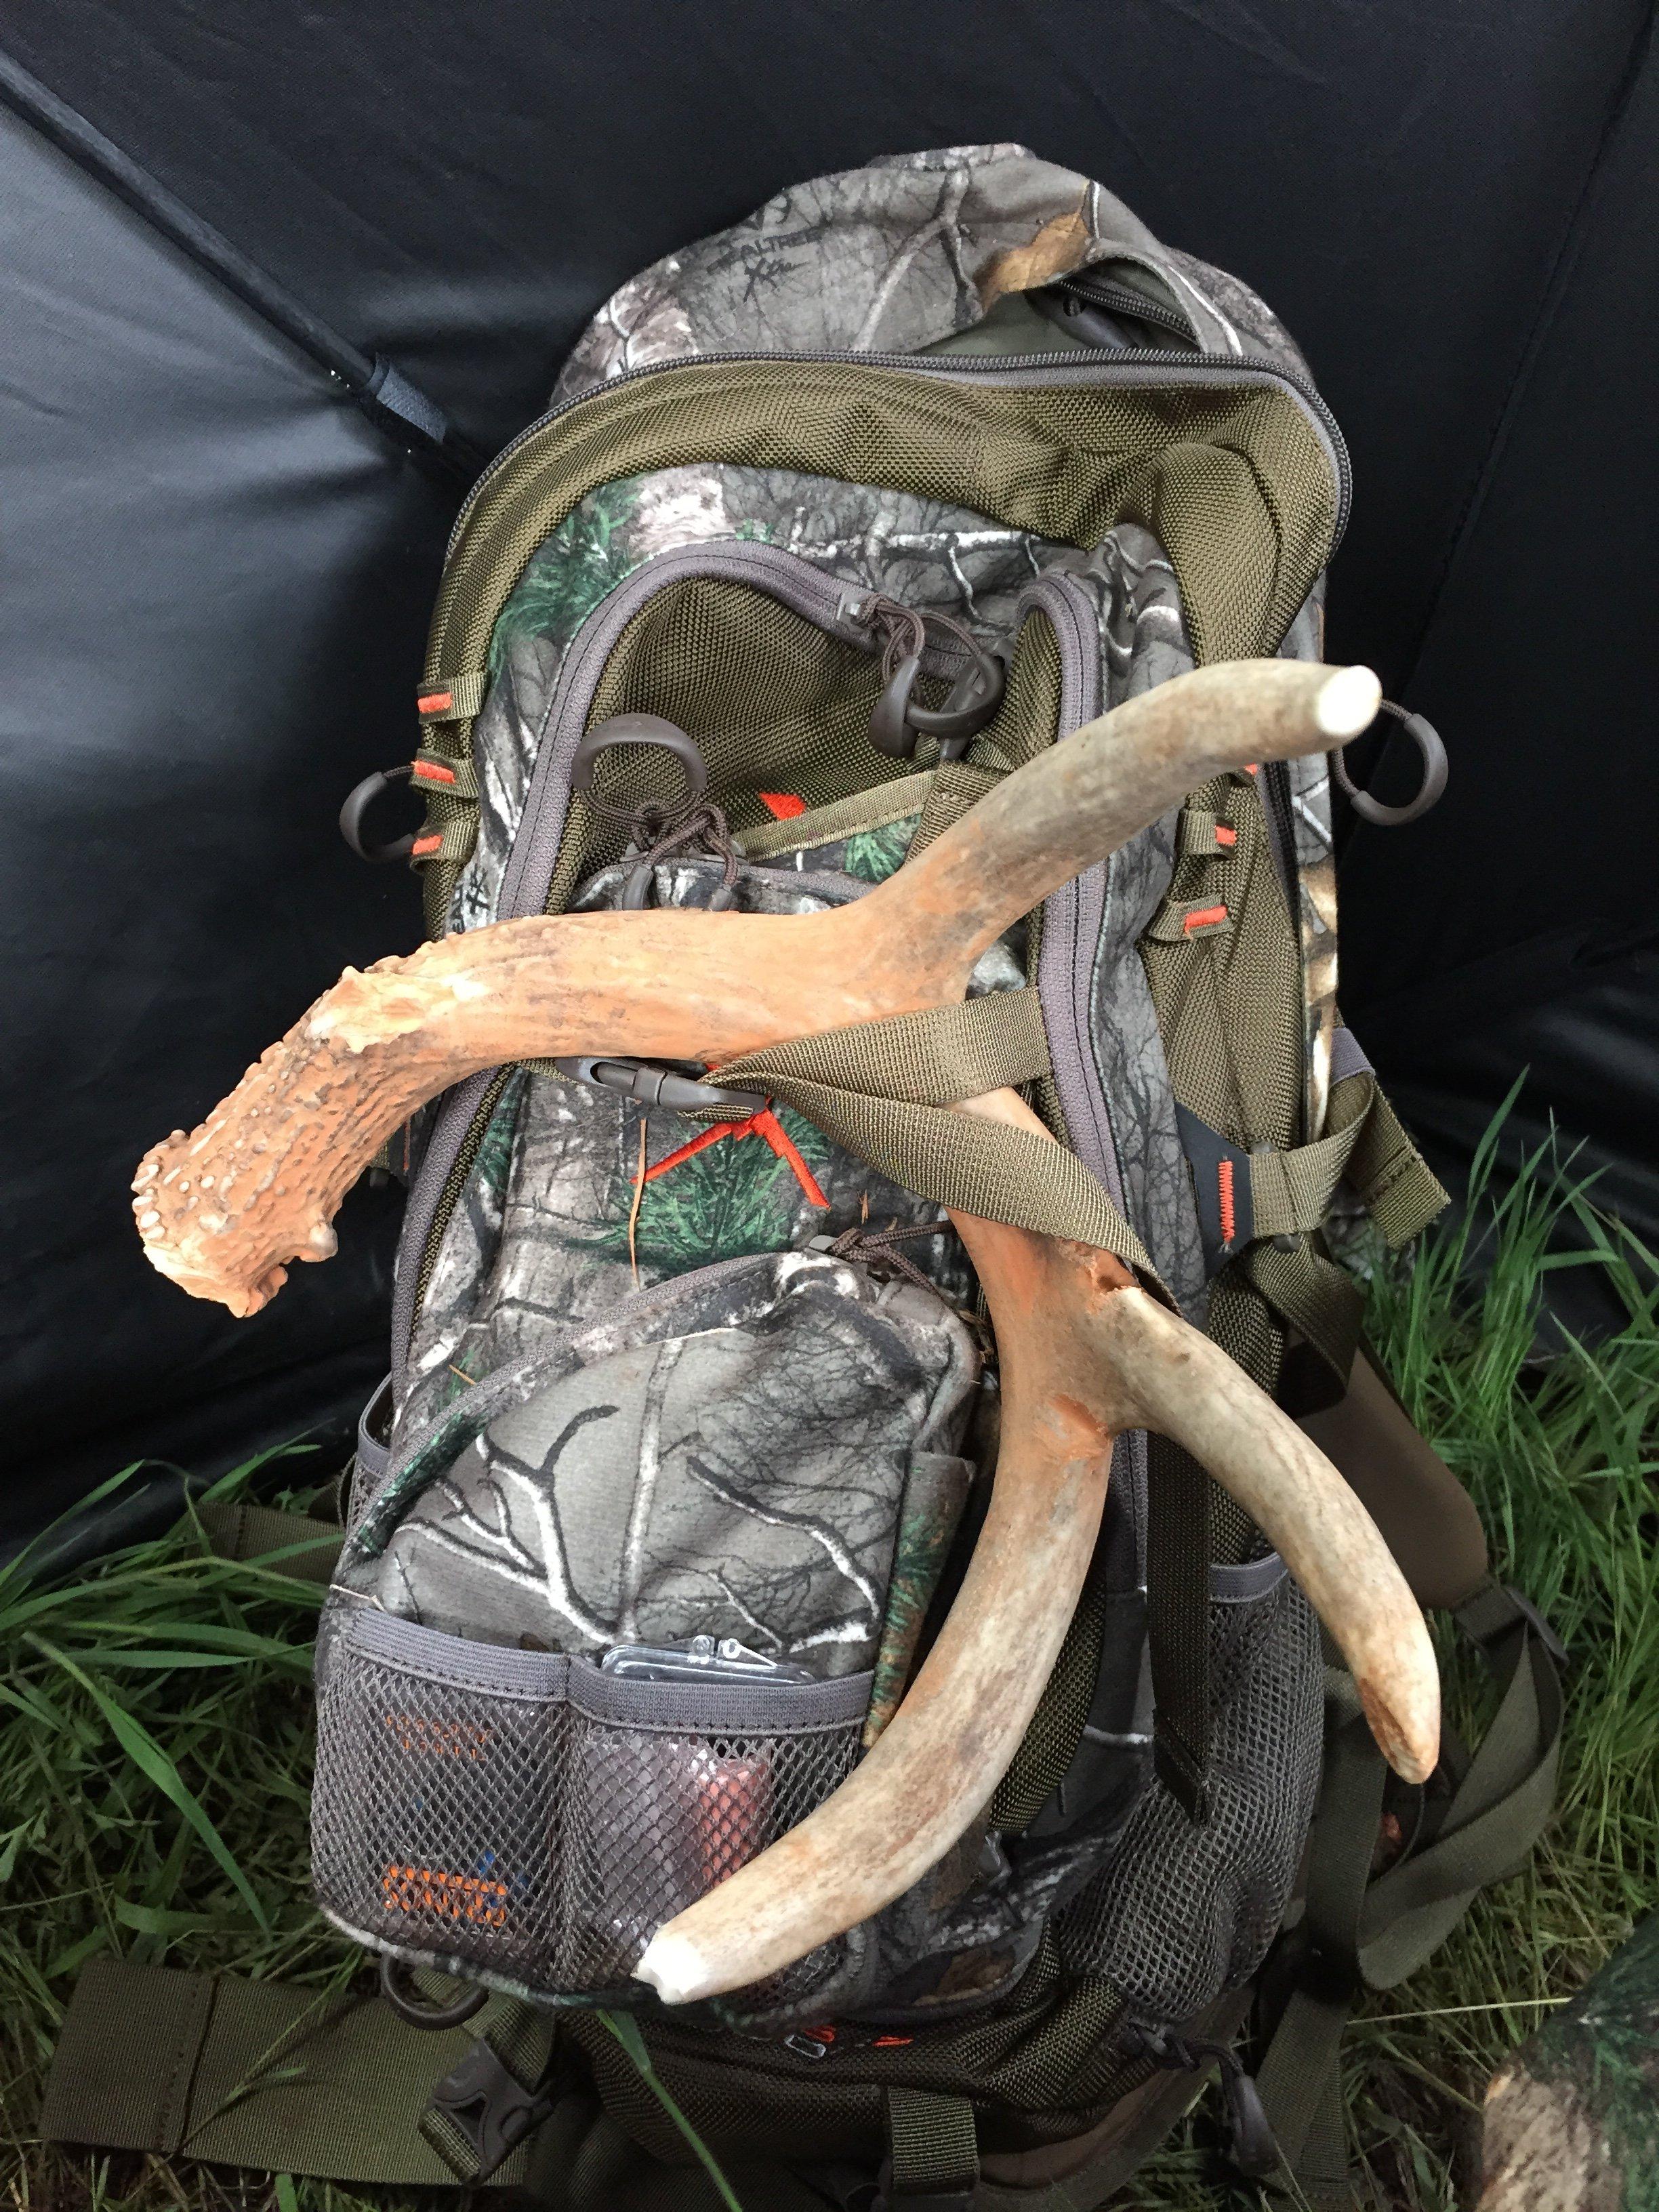 Several deer sheds were found on this turkey hunt. Here's mine. (Steve Hickoff)